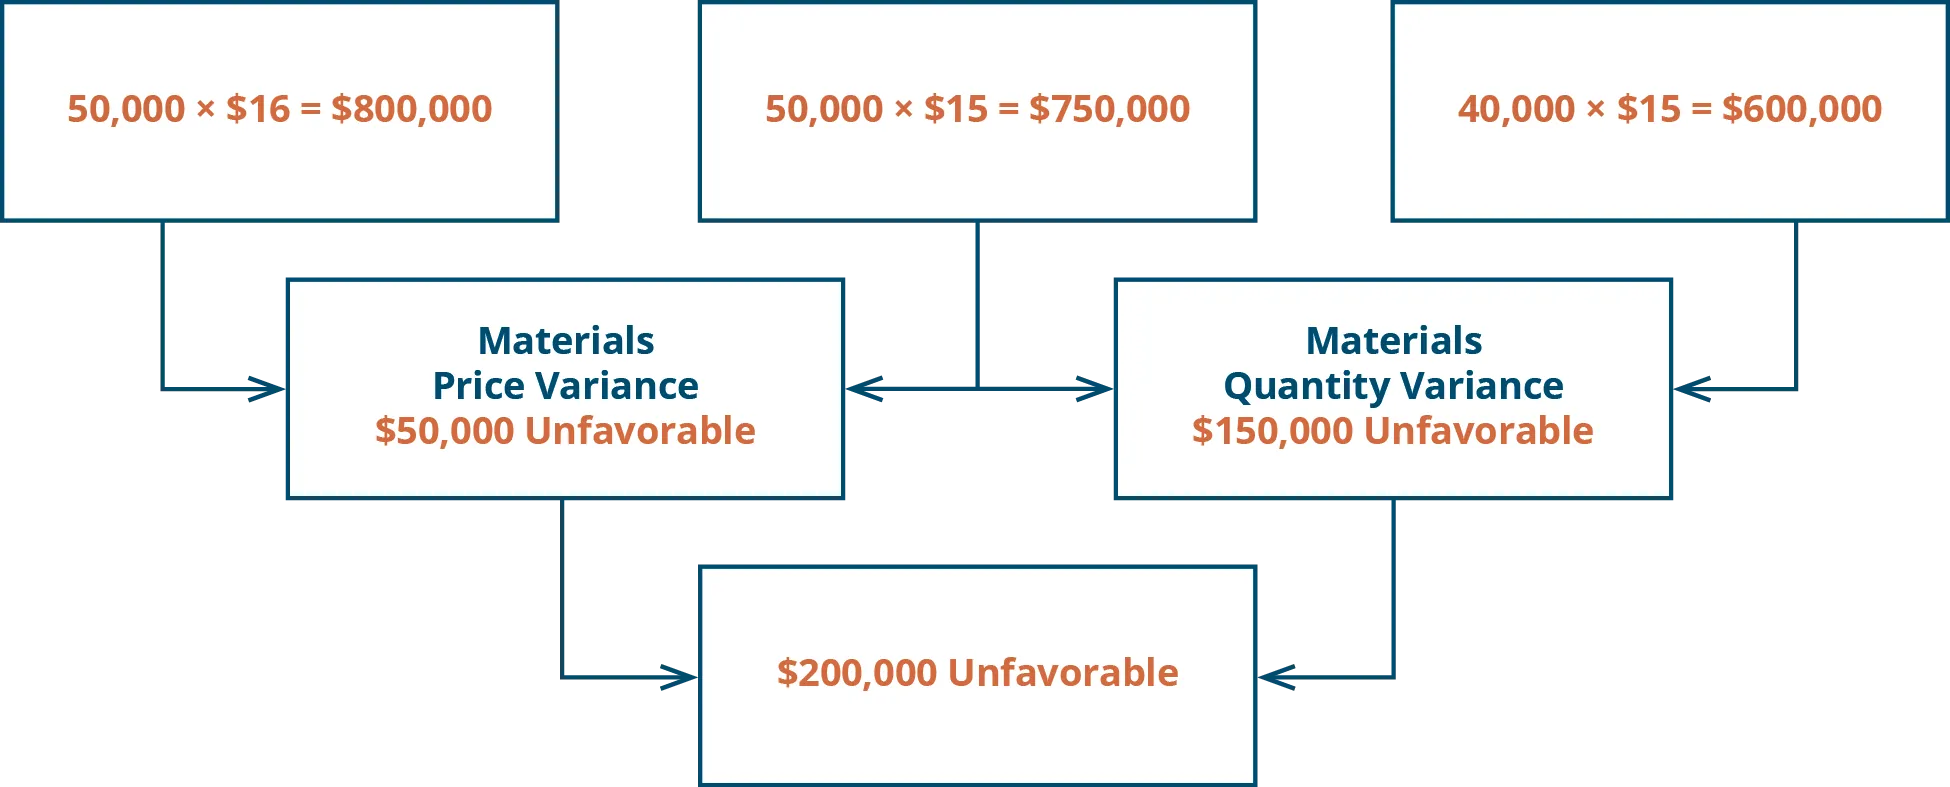 Materials Price Variance 50,000 times $16 equals $800,000. 50,000 times $15 equals $750,000. $50,000 unfavorable, Plus: Materials Quantity variance 50,000 times $15 equals 750,000. 40,000 times $15 equals $600,00. $150,000 unfavorable. Equals $200,000 unfavorable.